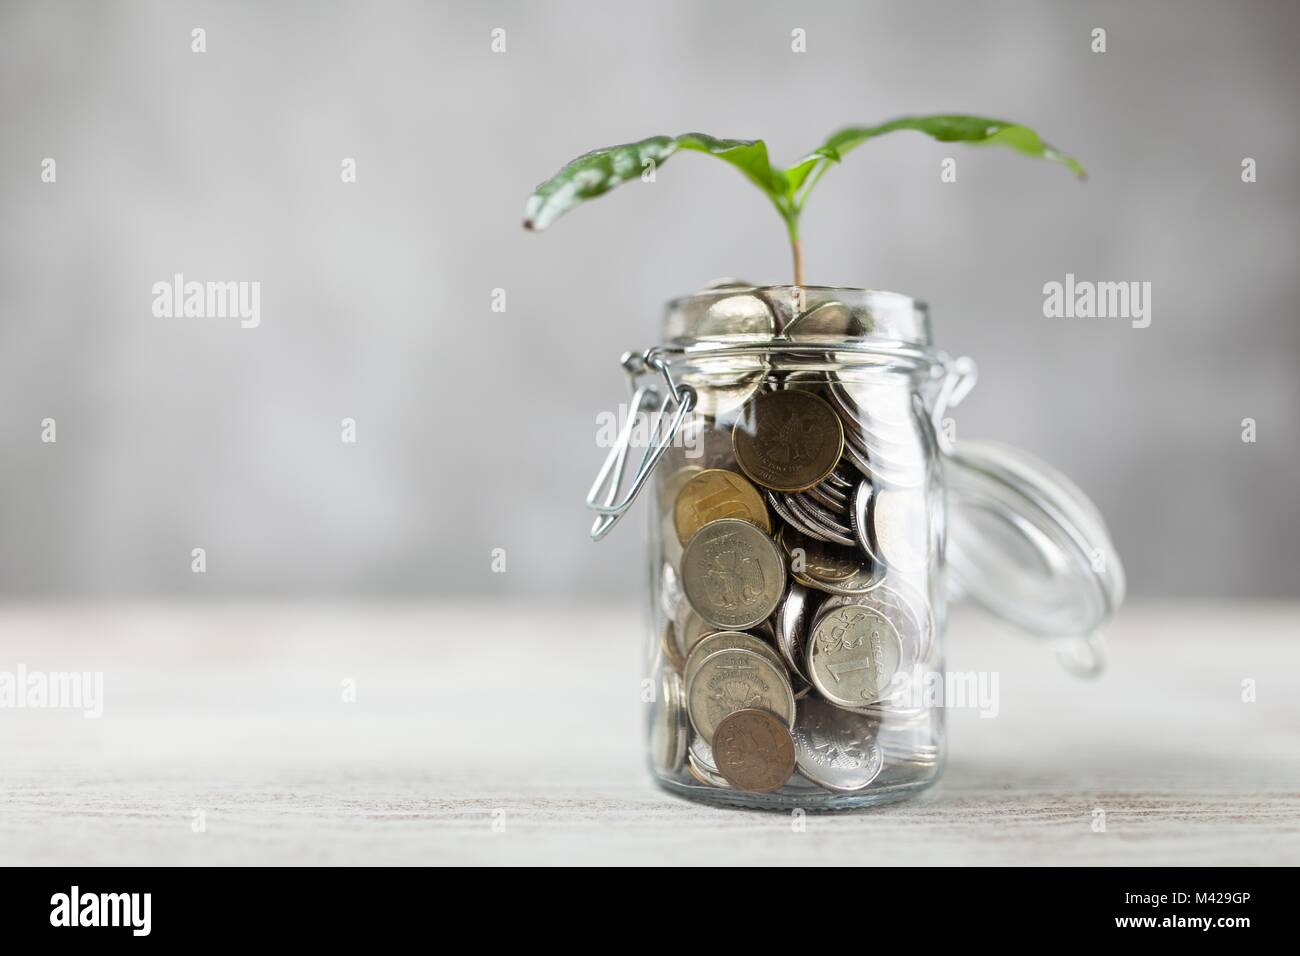 Coins in a glass jar Stock Photo